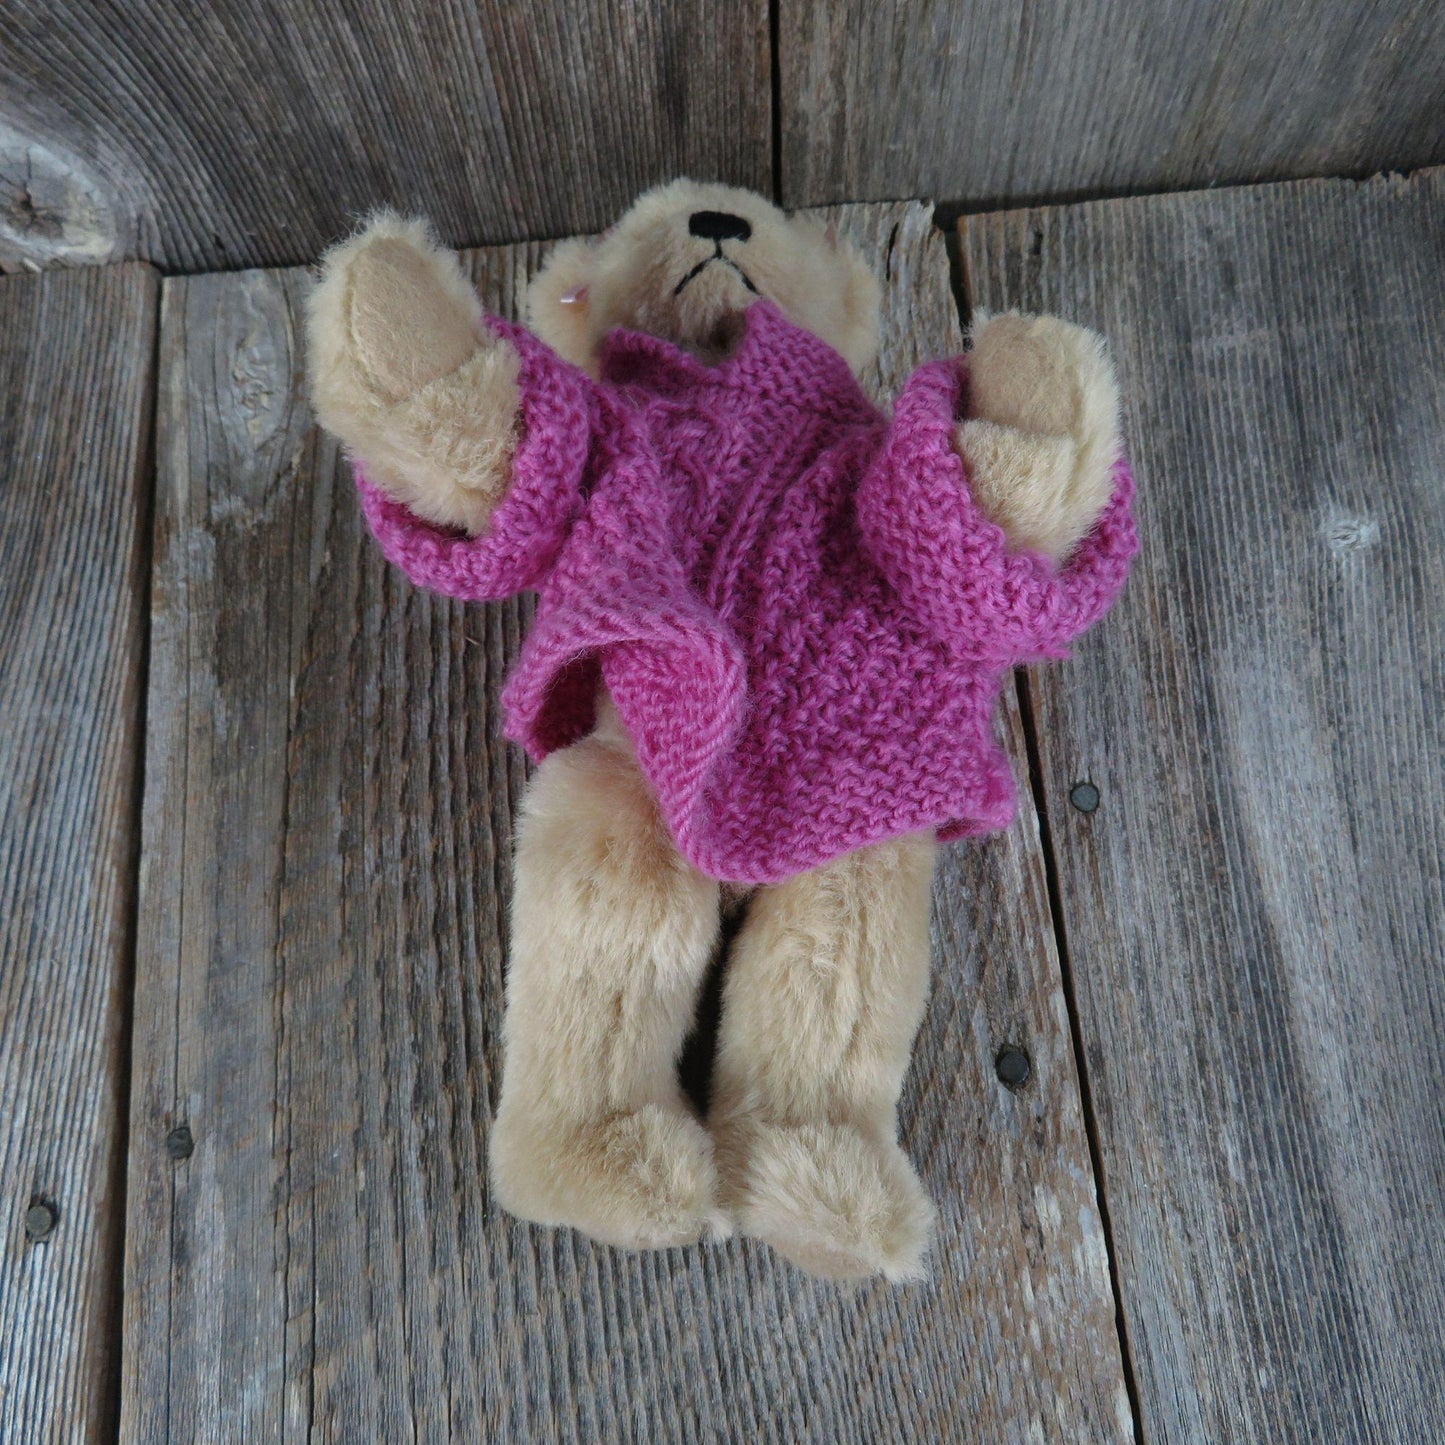 Vintage Teddy Bear Plush Jointed Sweater Bows Ganz Cottage Collection Daphne 1997 Stuffed Animal